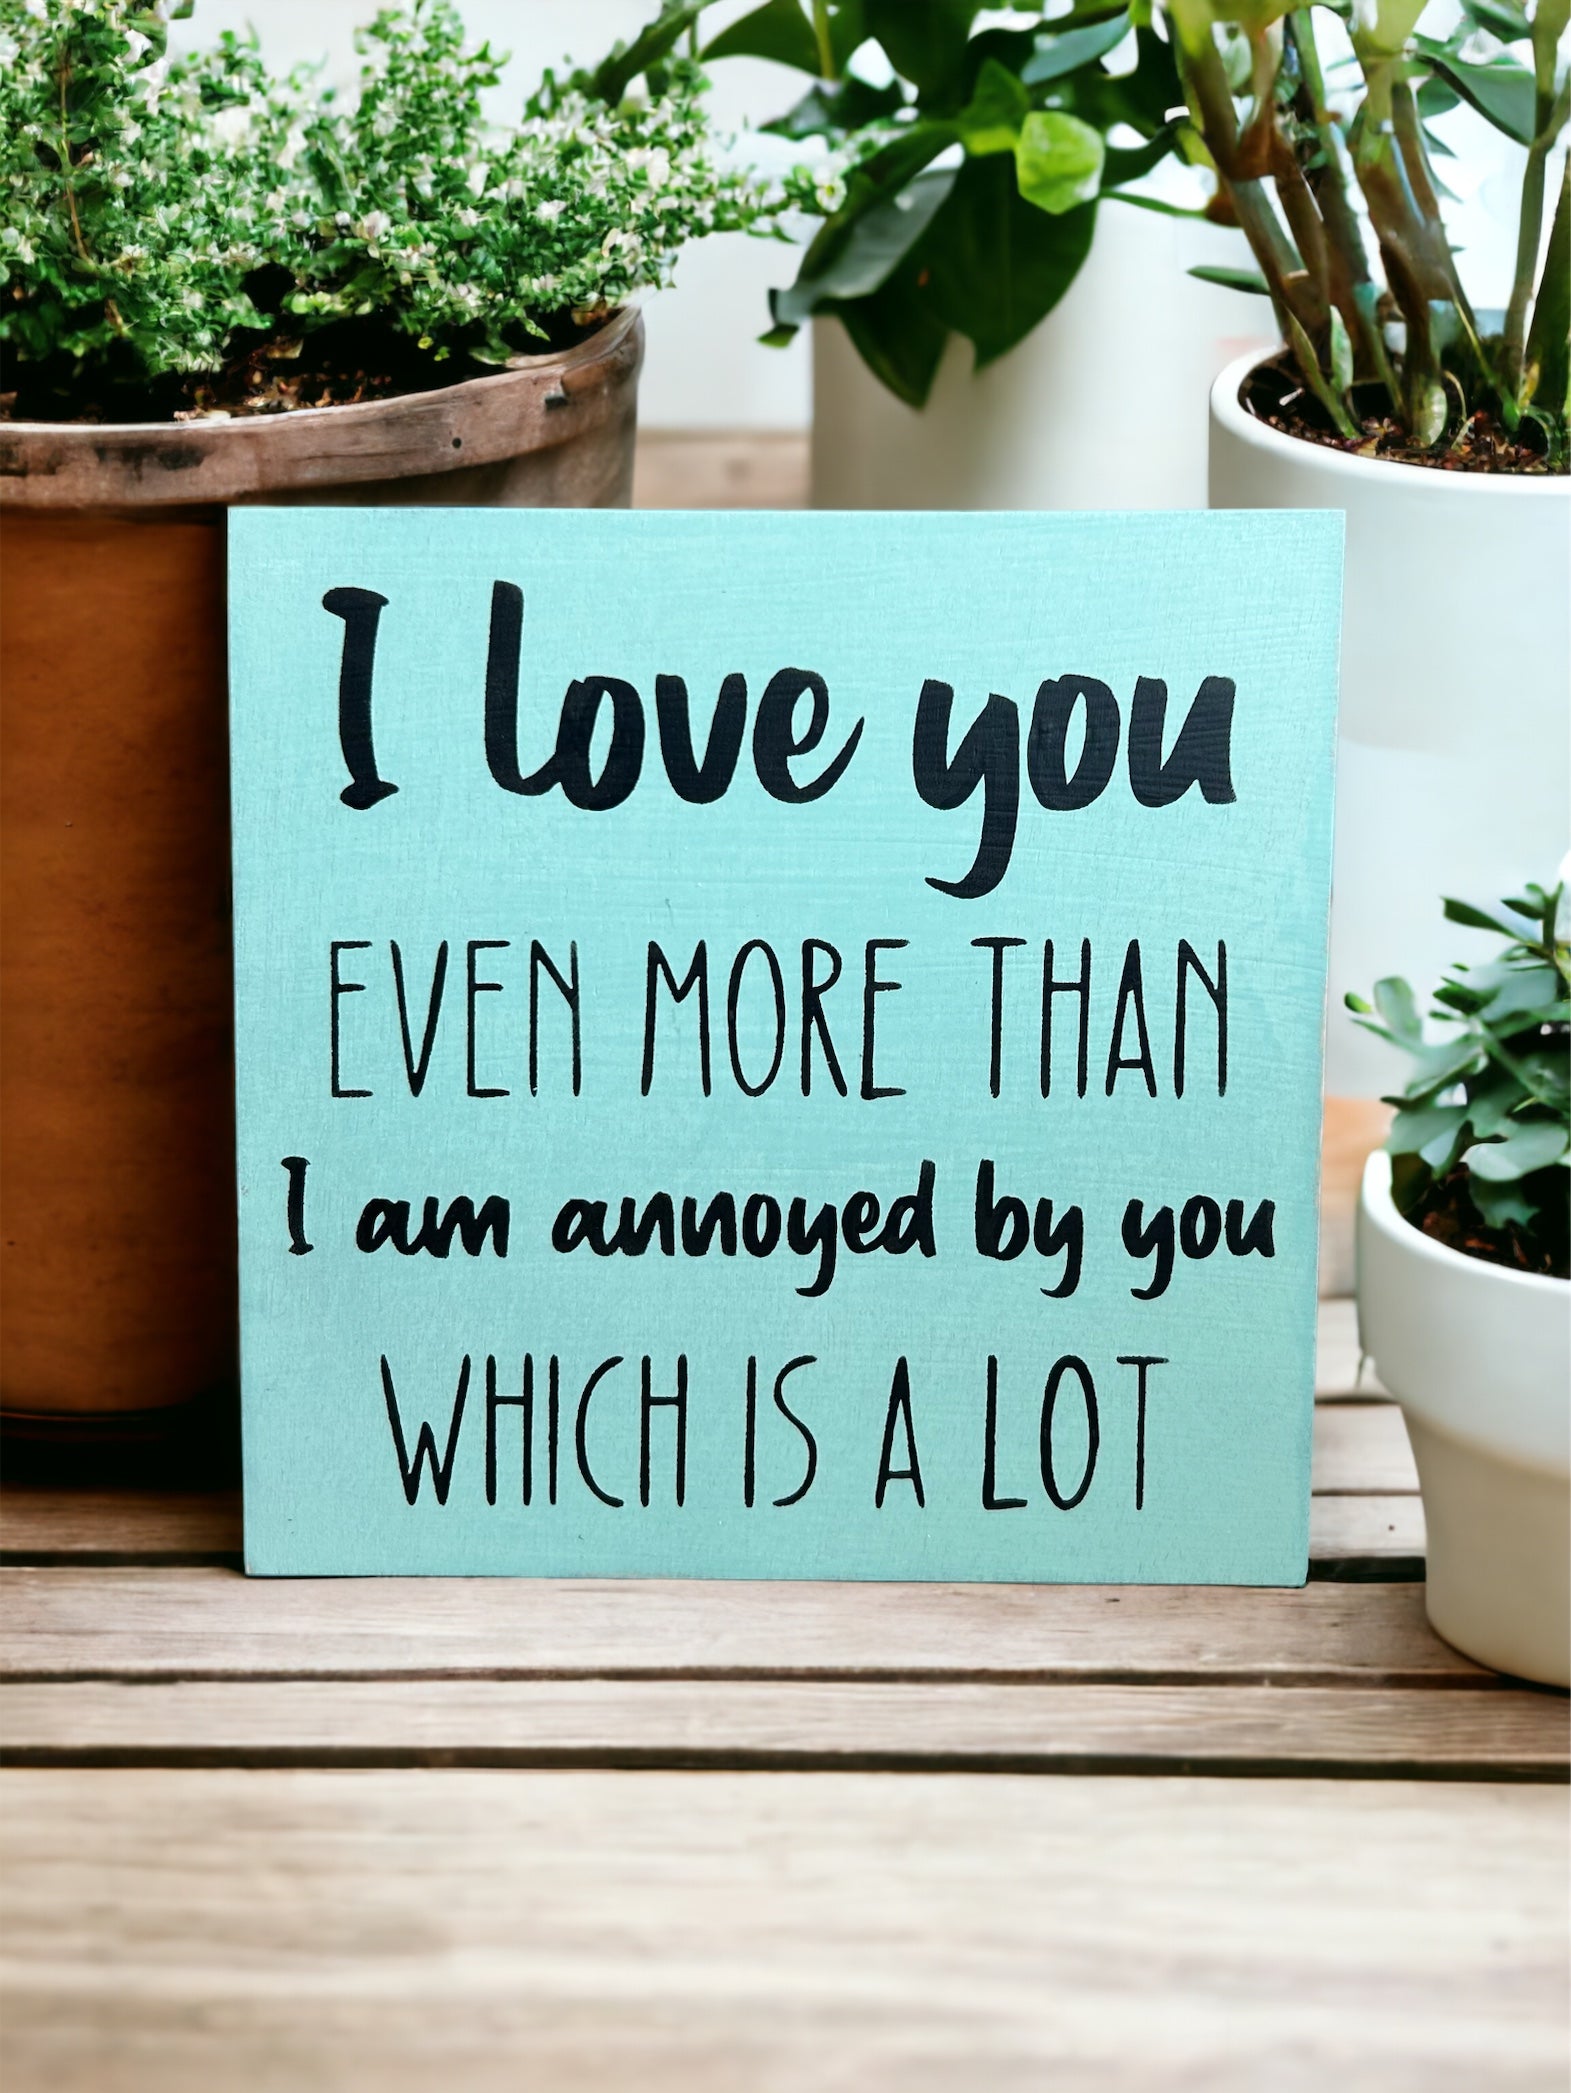 "I love you more" funny wood sign